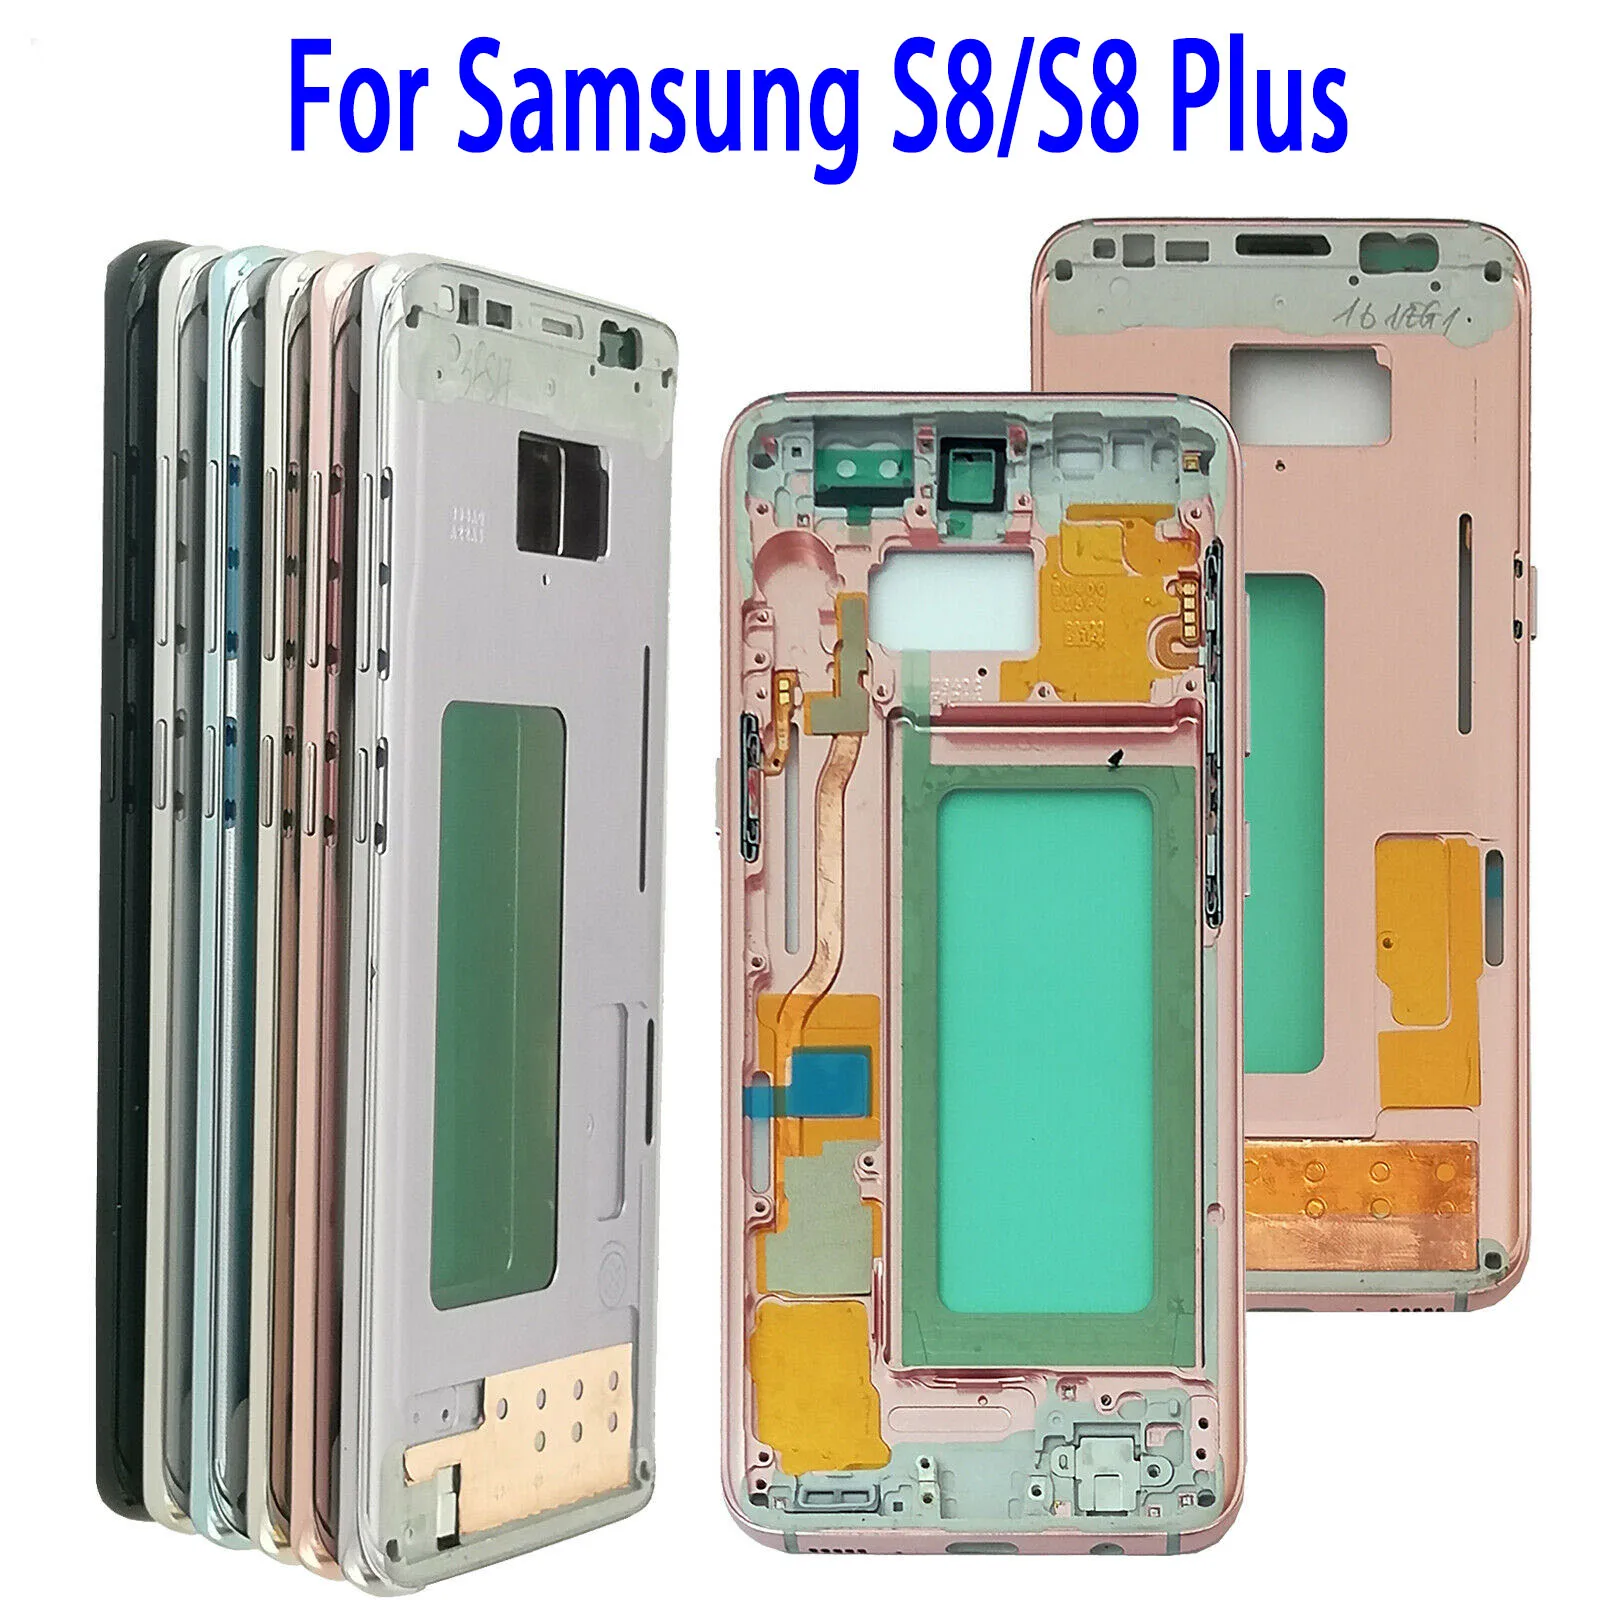 

For Samsung Galaxy S8 Plus SM-G955F S8 G950FD Middle Frame Midplate Bezel Chassis Housing Parts Free Tools for Reparing Adhesive